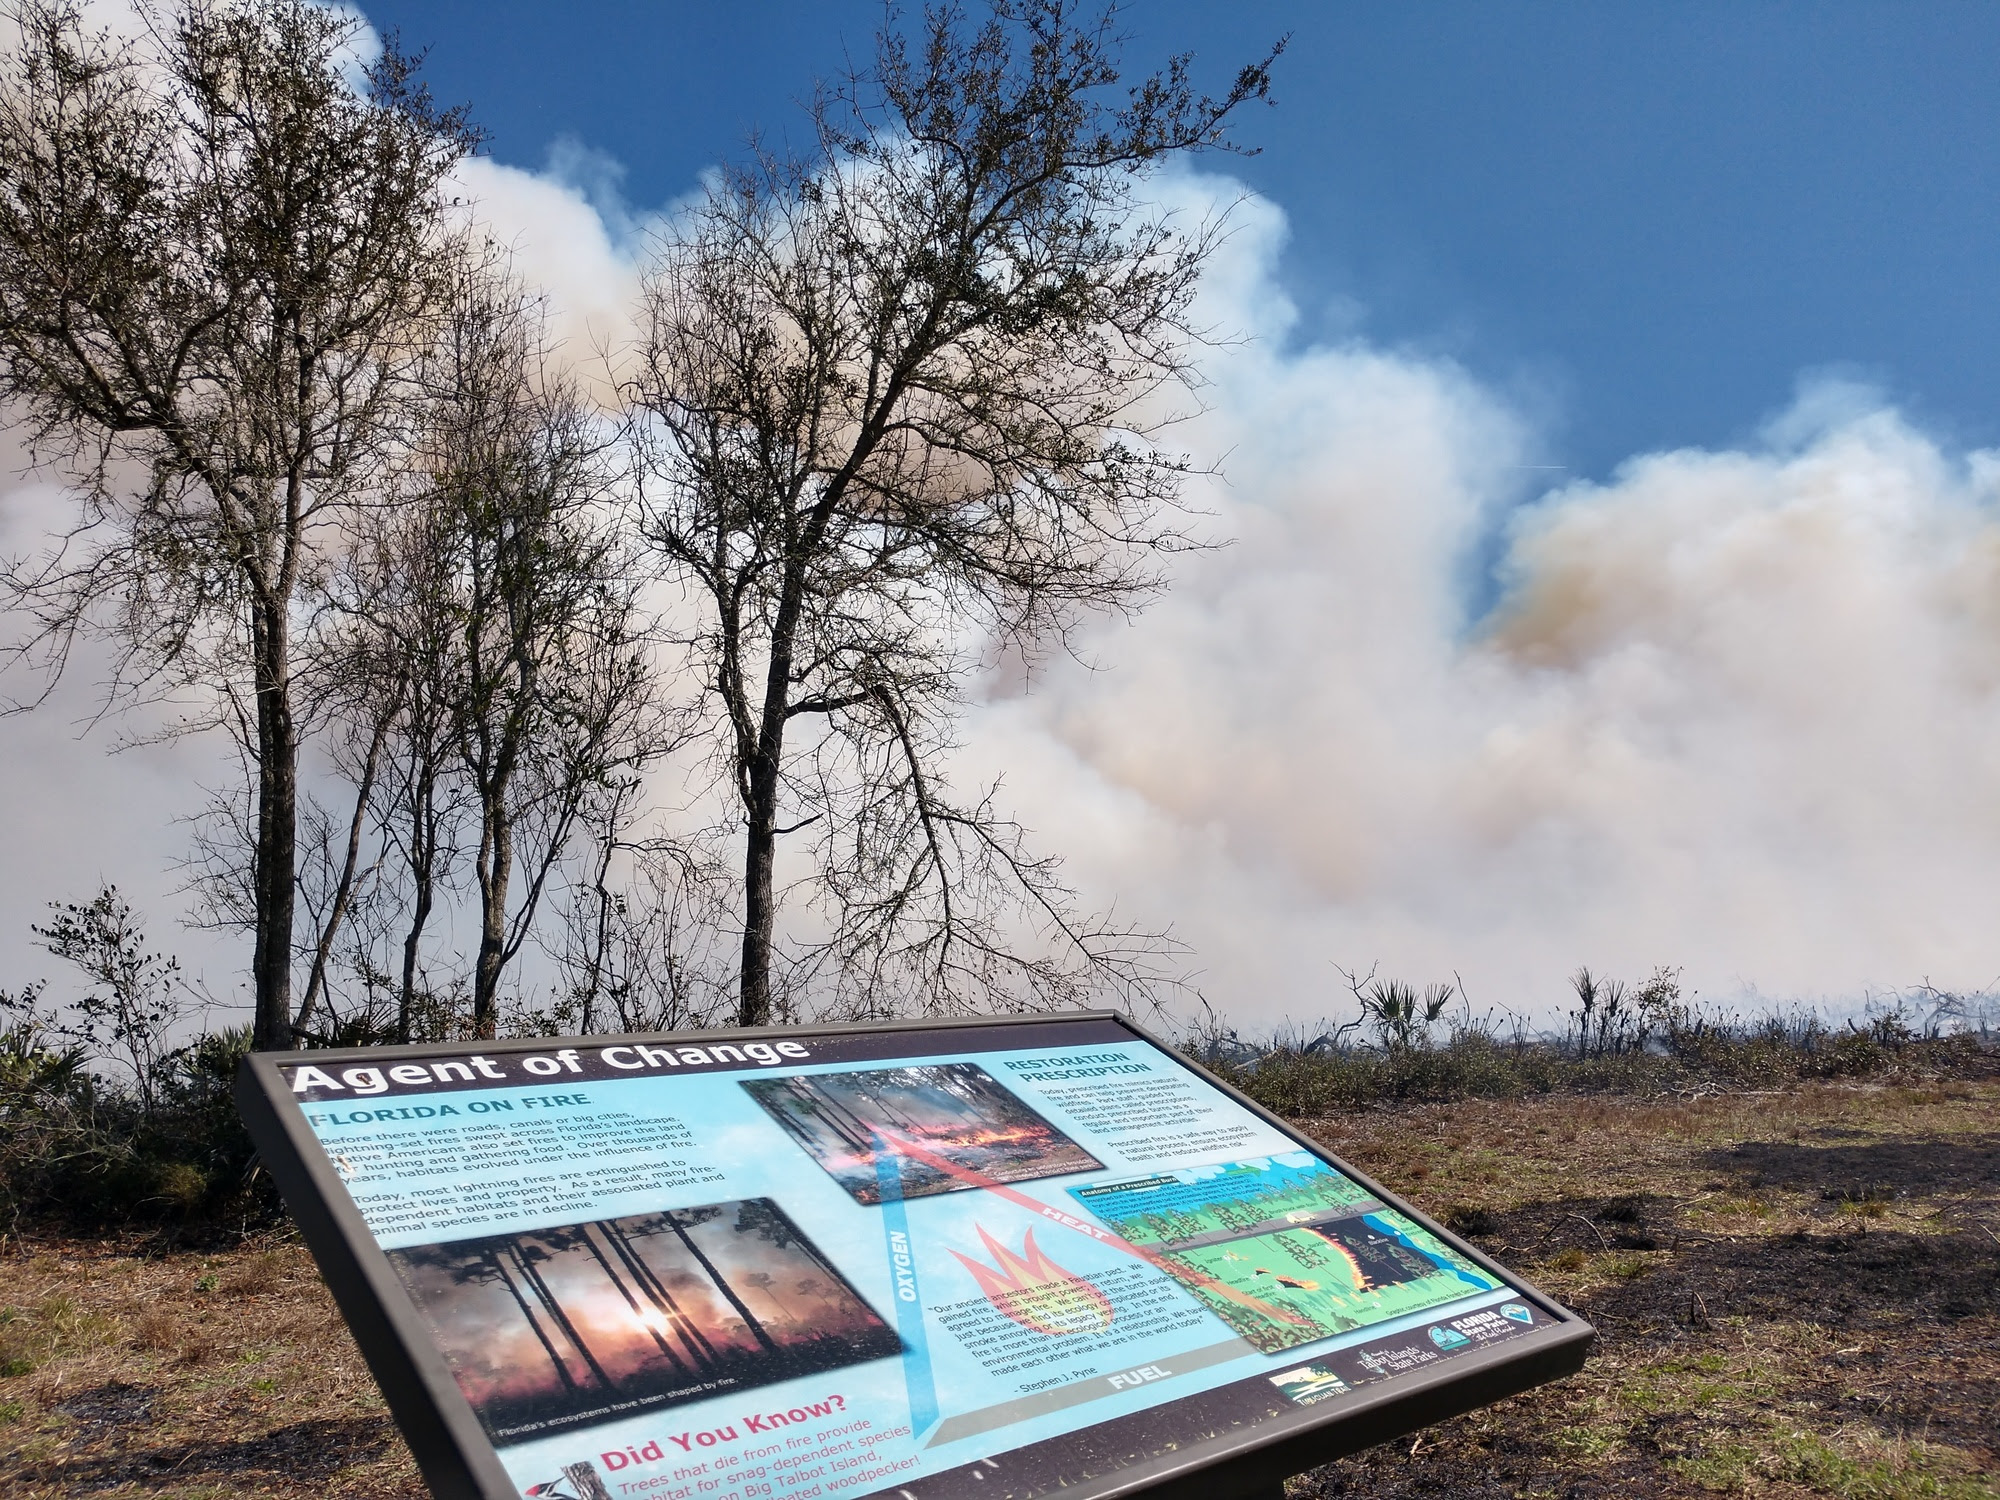 A fire burns at Big Talbot Island in front of an interpretive sign